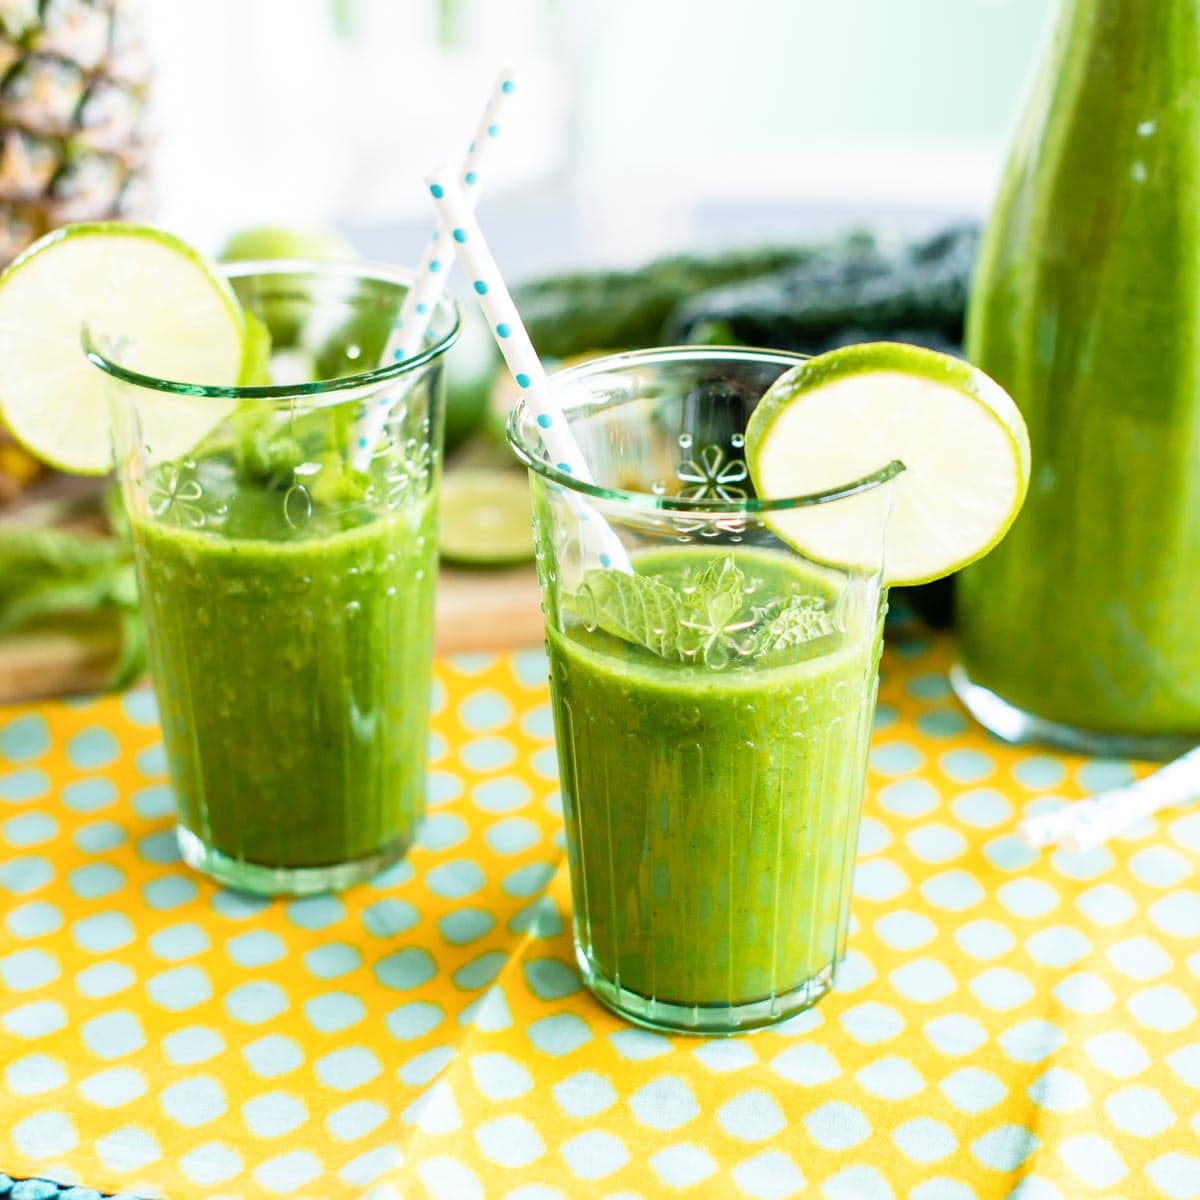 Green Smoothie With Mint Recipe- Learn with Experts